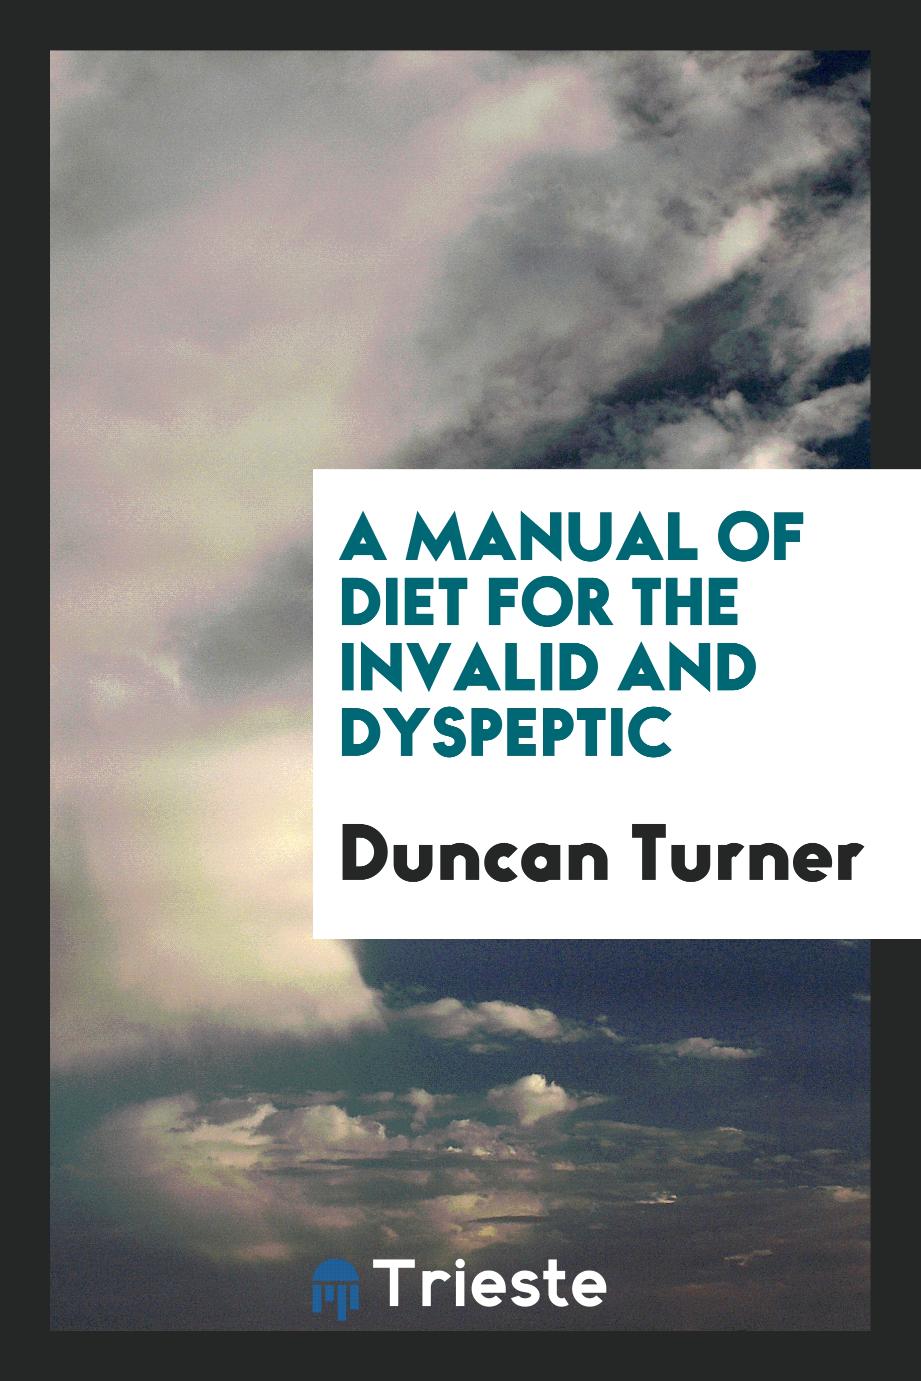 A Manual of Diet for the Invalid and Dyspeptic